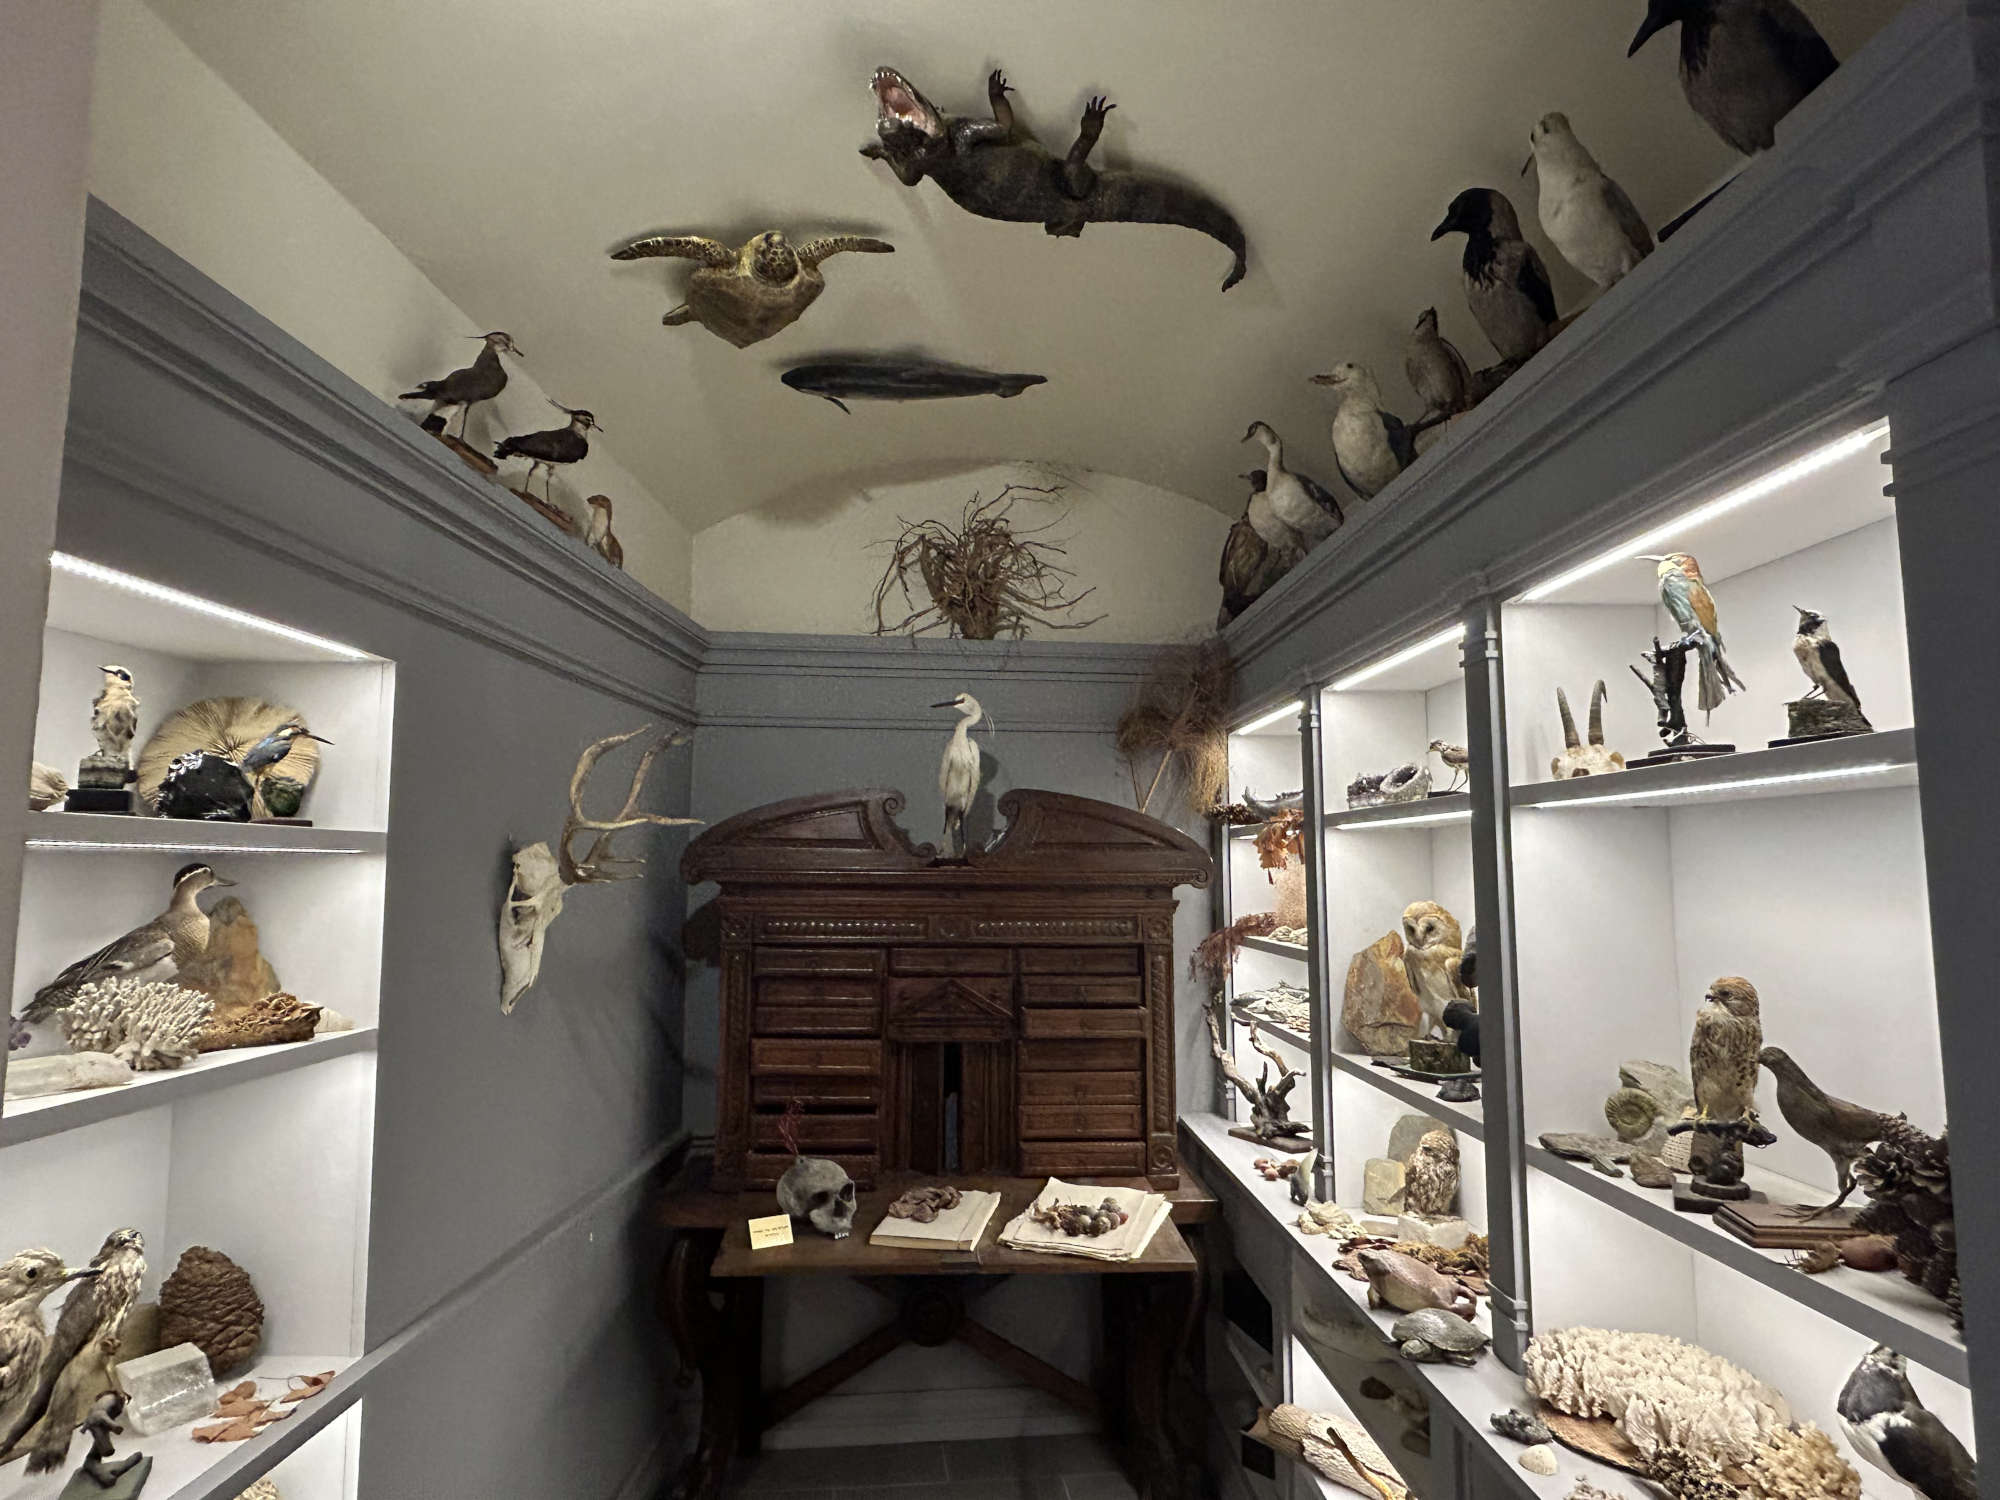 The reconstruction of the Wunderkammer